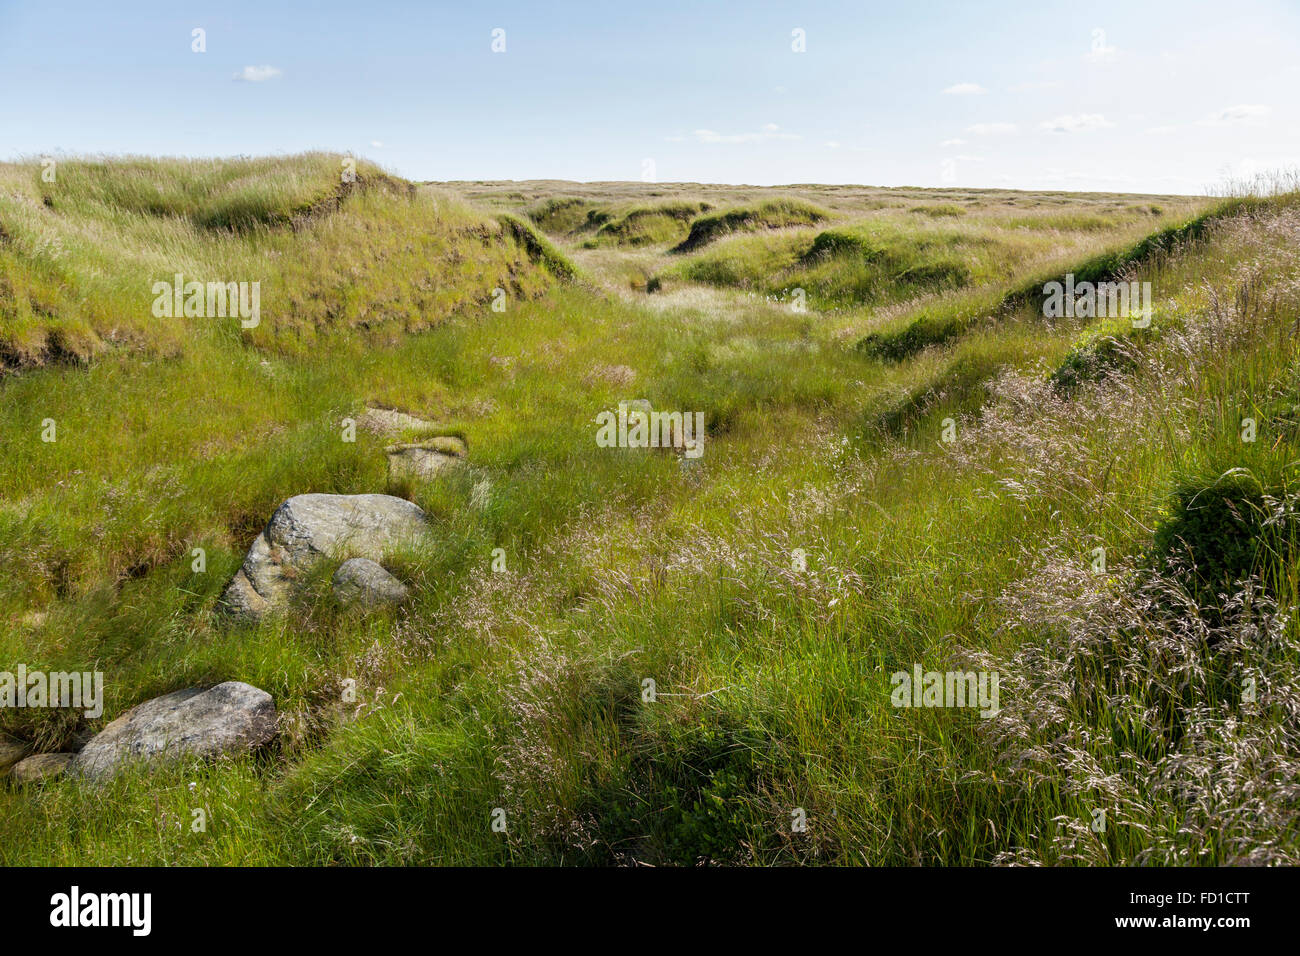 New growth of moor grass and other vegetation in a gully, ditch or grough after moorland restoration on Kinder Scout, Derbyshire, England, UK Stock Photo